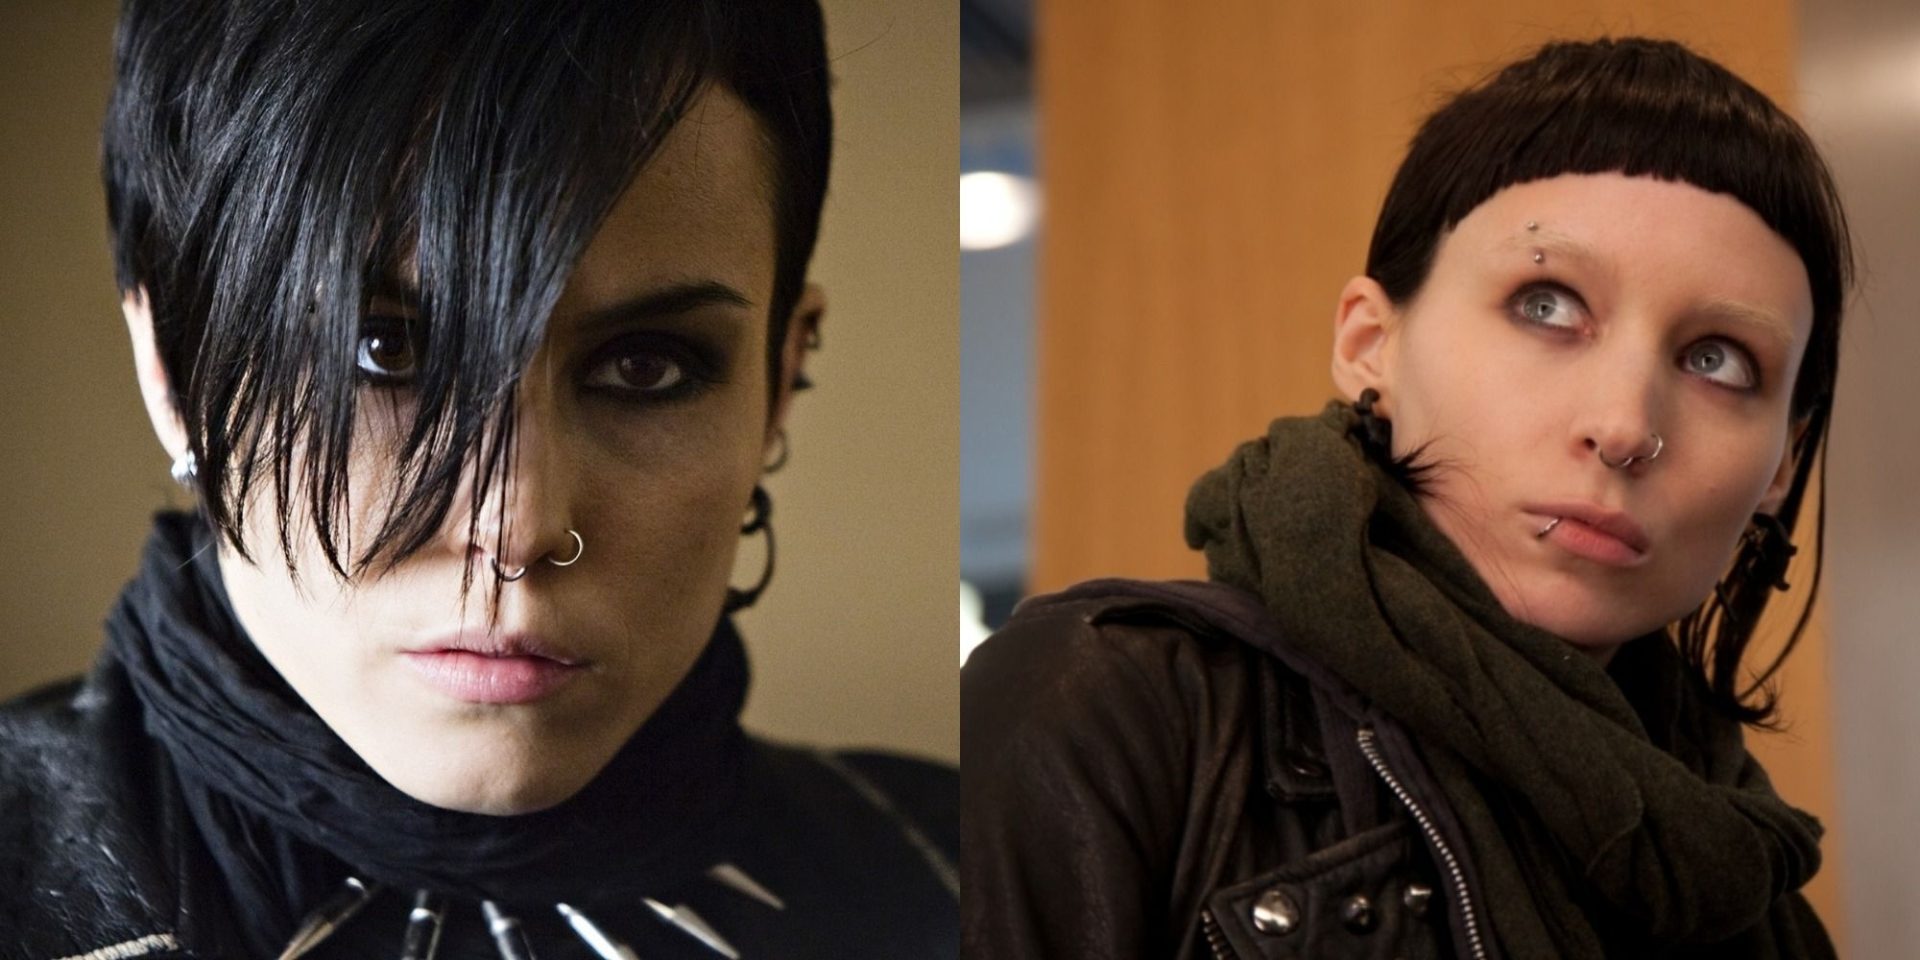 Original The Girl With the Dragon Tattoo Actor Lisbeth Shares Advice for TV Reboot